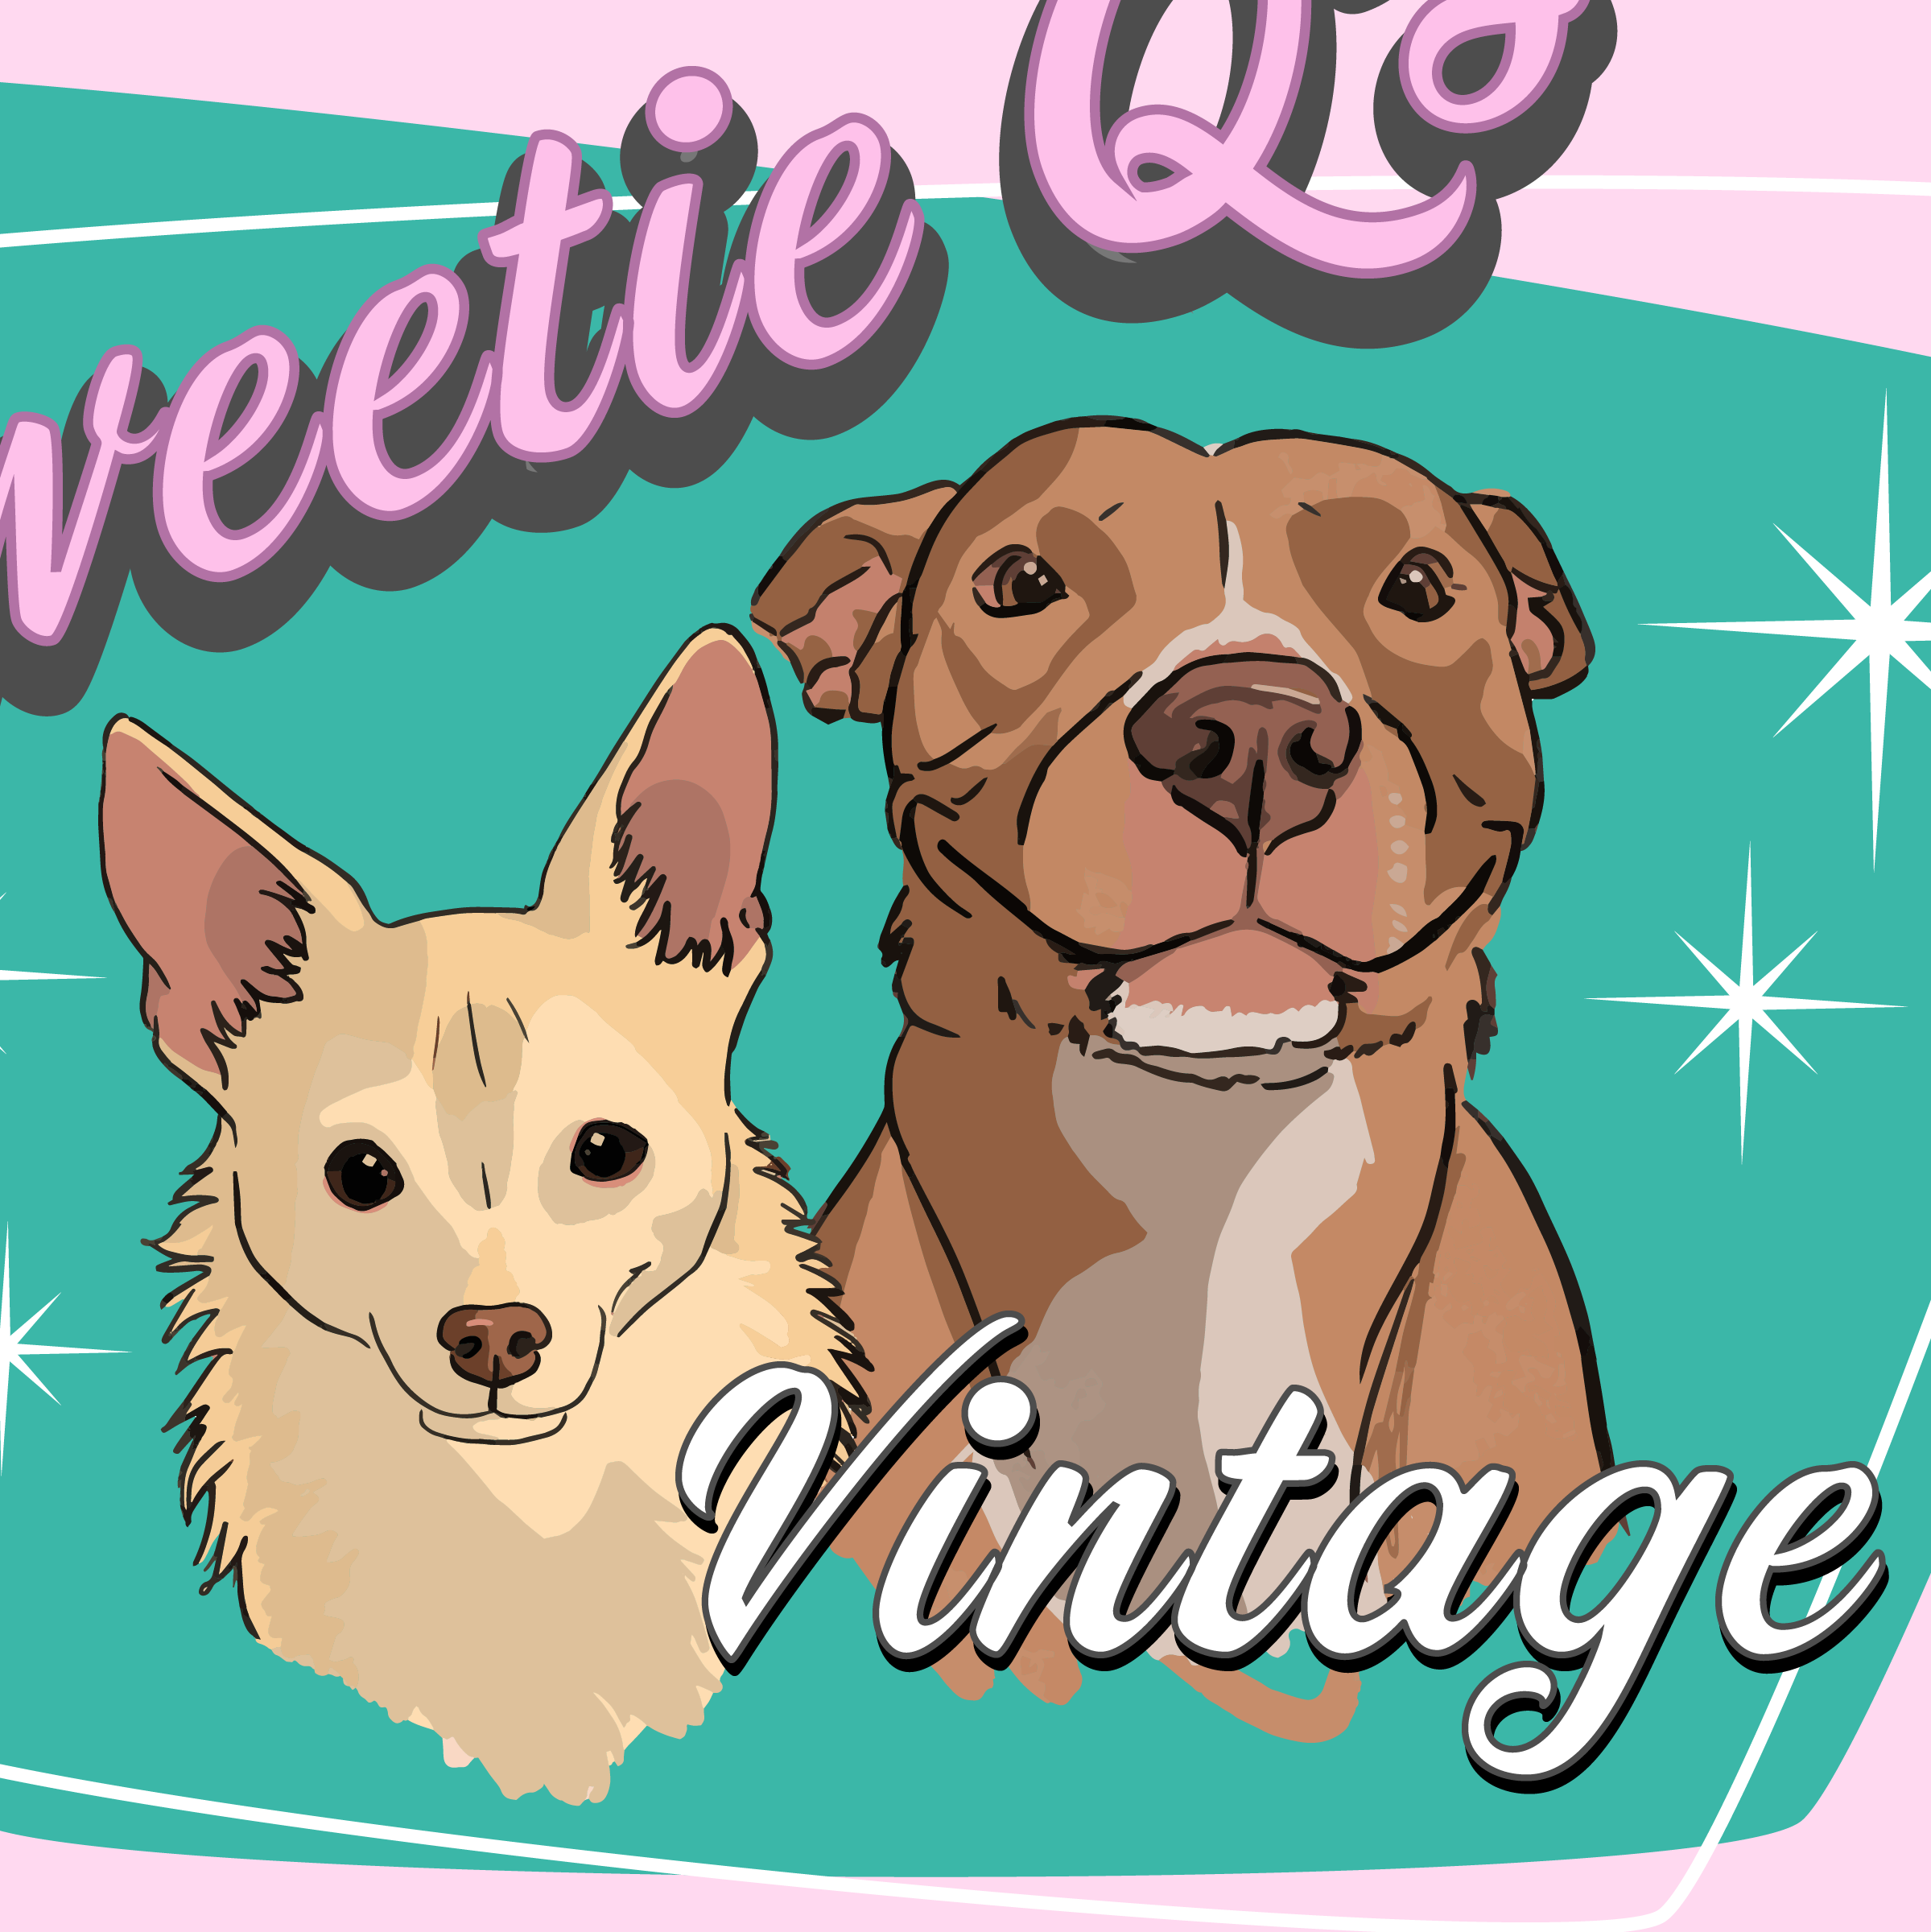 Screenshot of the Sweetie Q's Vintage logo with two dogs in frame: one is a small white chihuahua and the other is a tan bully breed type.